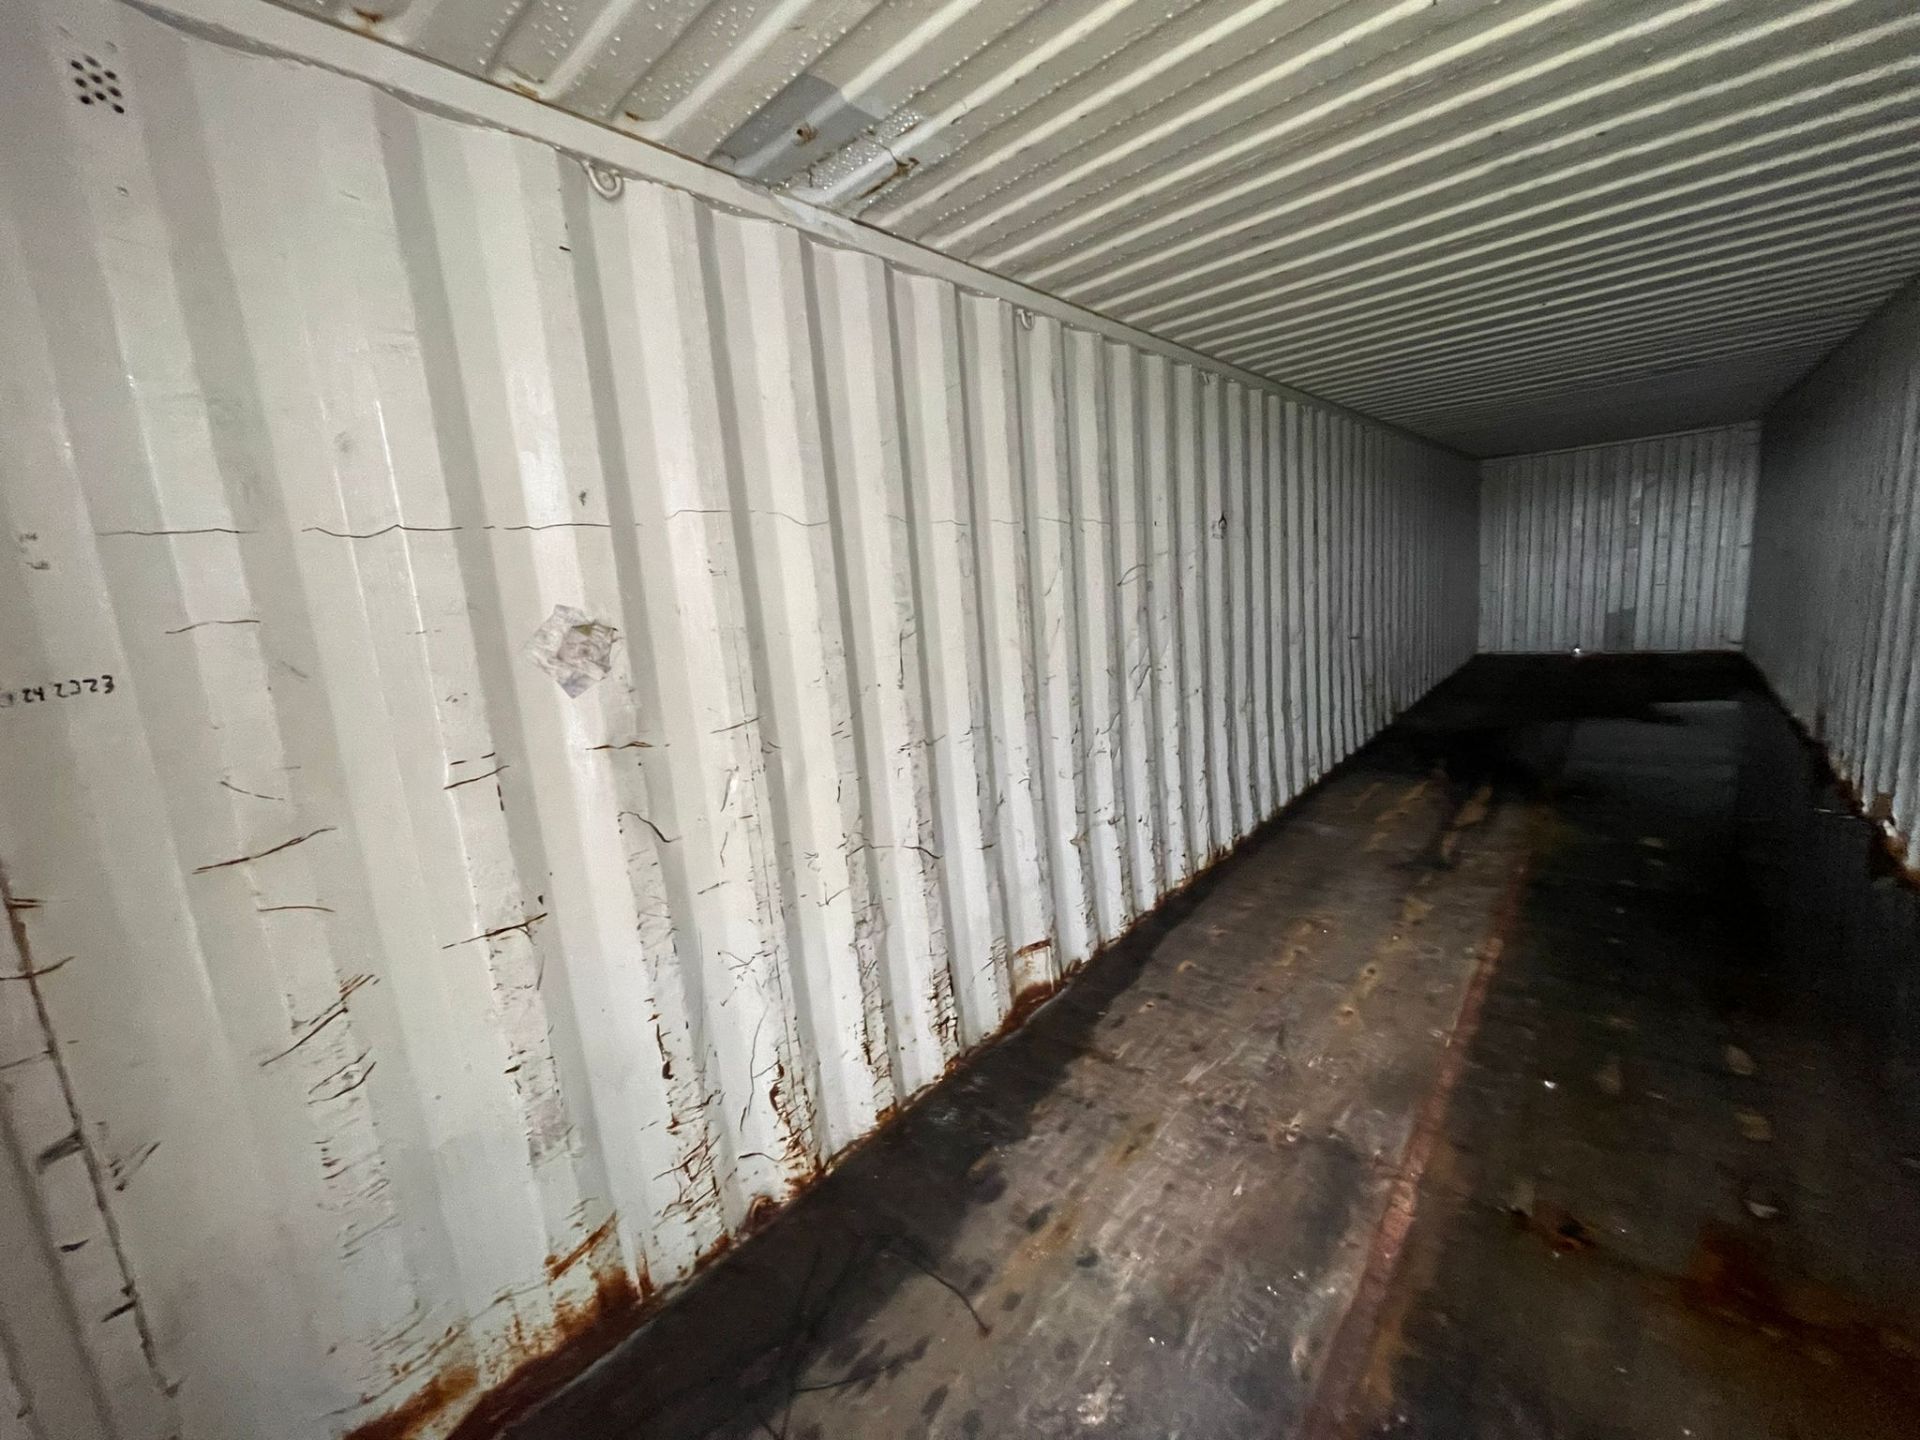 Shipping Container - ref TRLU4434342 - NO RESERVE (40’ GP - Standard) - Image 4 of 4